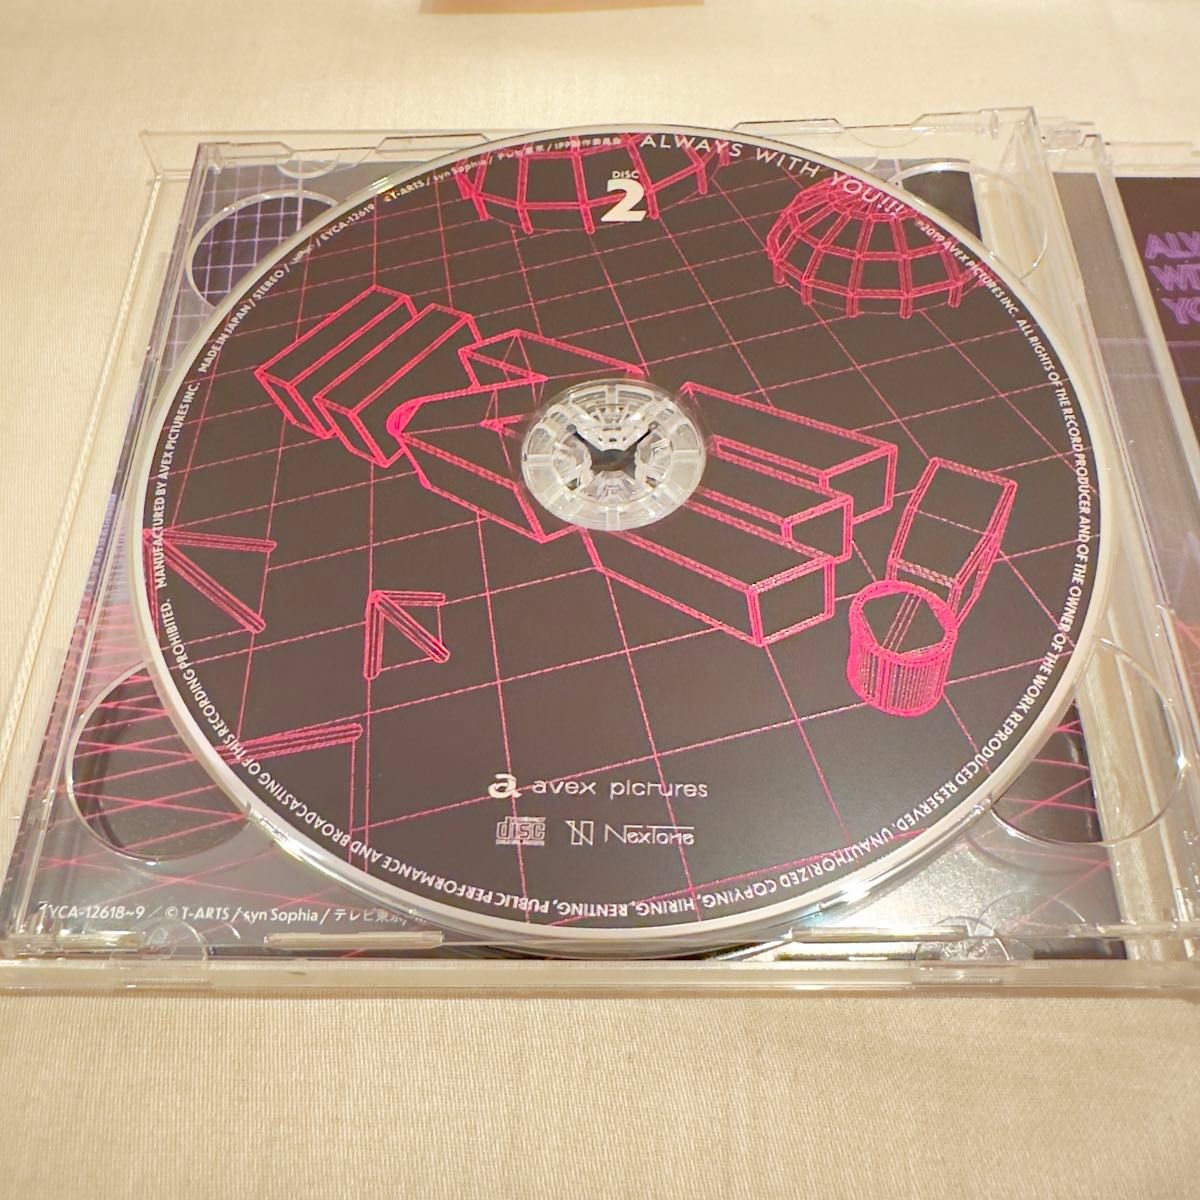 WITH／ALWAYS WITH YOU!!!  CD  プリパラ ダンプリ  